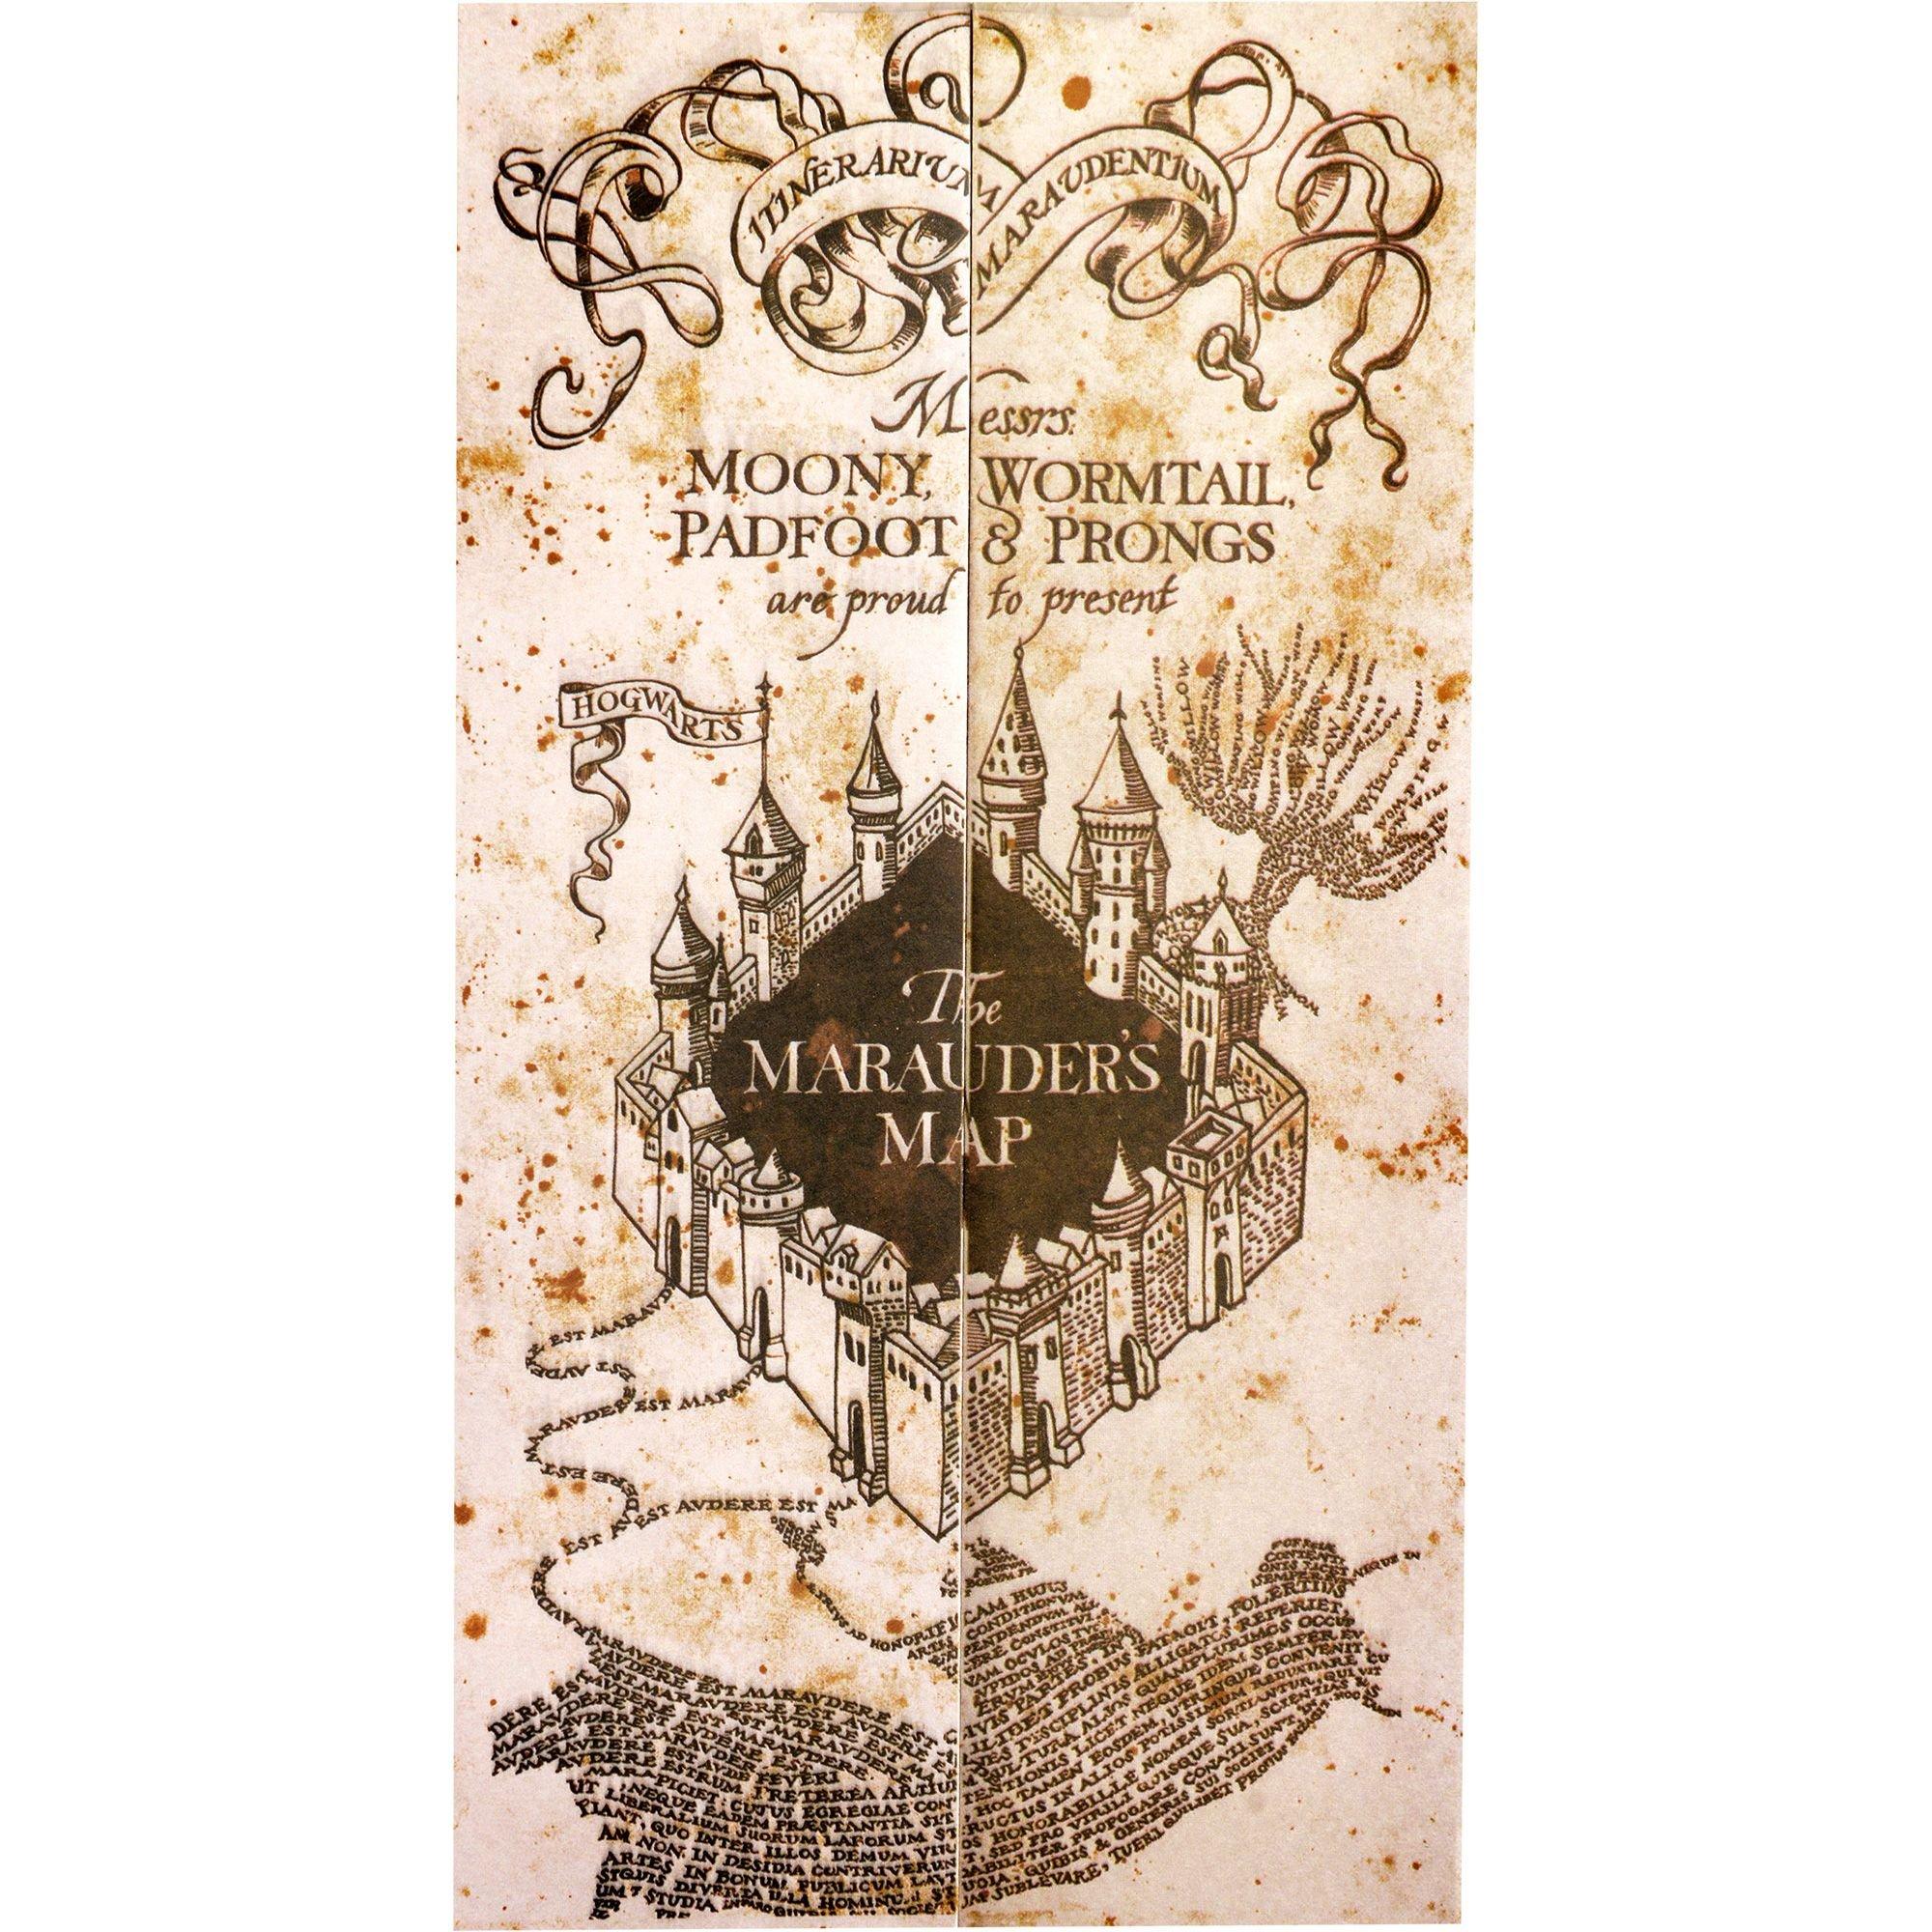 What Is the Marauder's Map in Harry Potter?